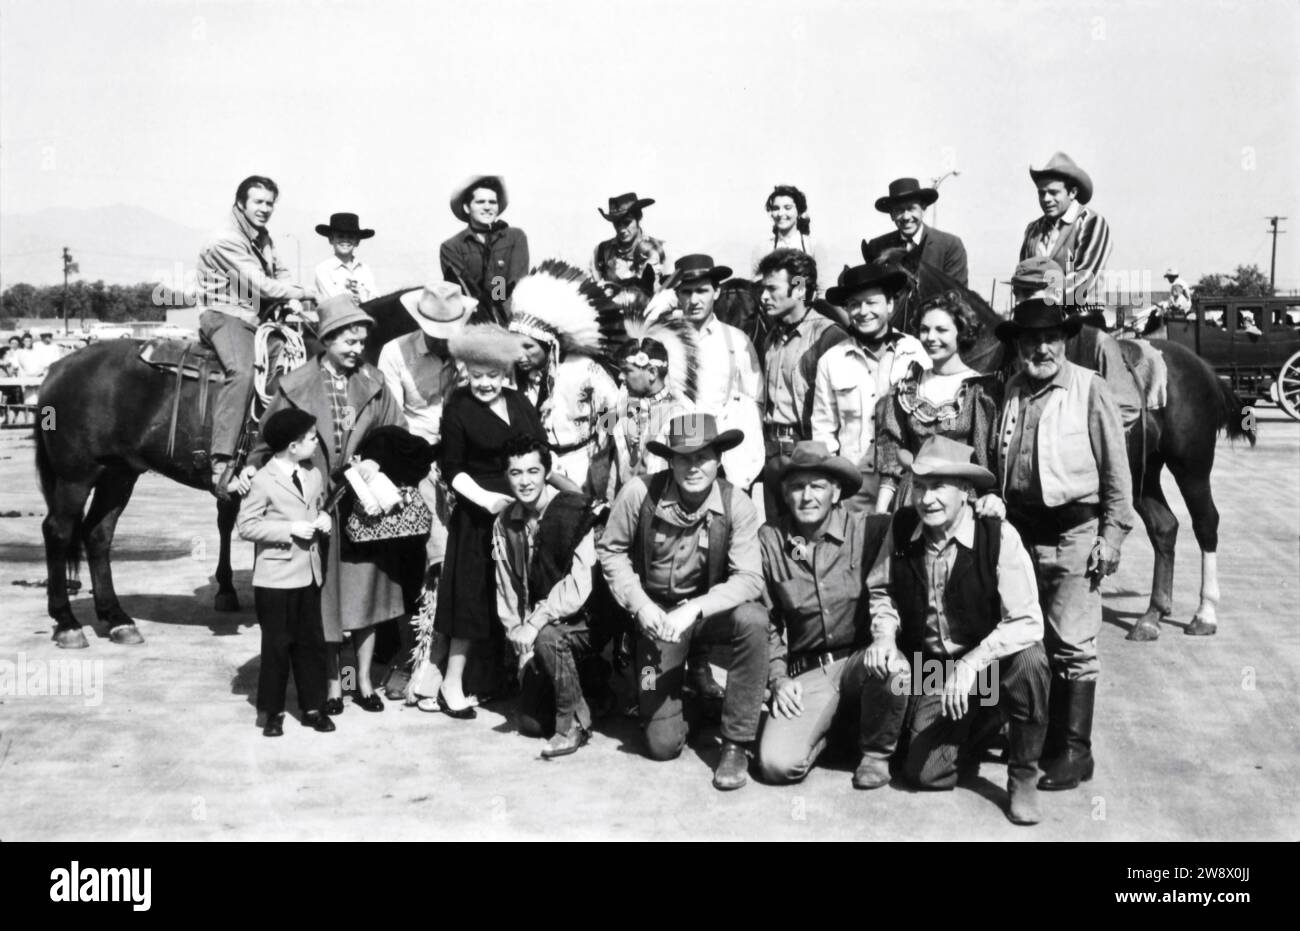 CLINT EASTWOOD in group photo circa 1963 candid at the time he was appearing in the TV series RAWHIDE at a cowboy / western show for disabled children with CLU GULAGER on horse at far left Stock Photo